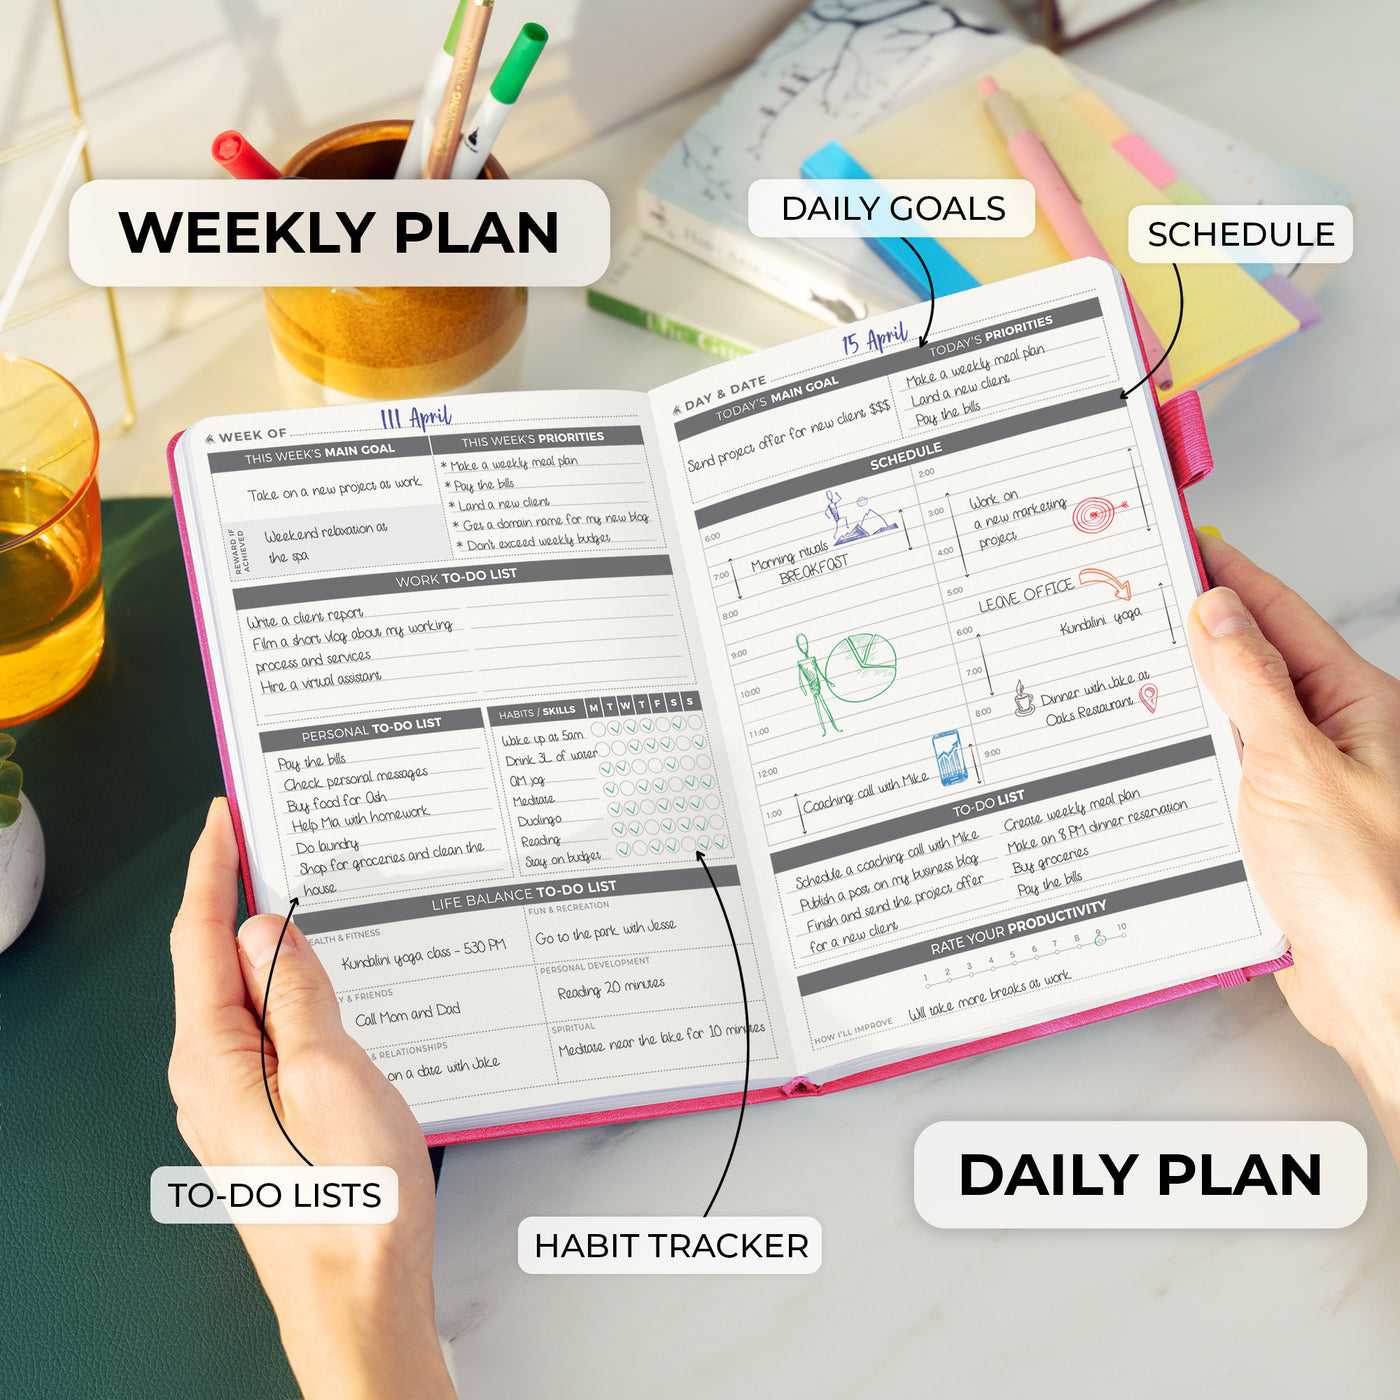 Clever Fox Weekly Planner 